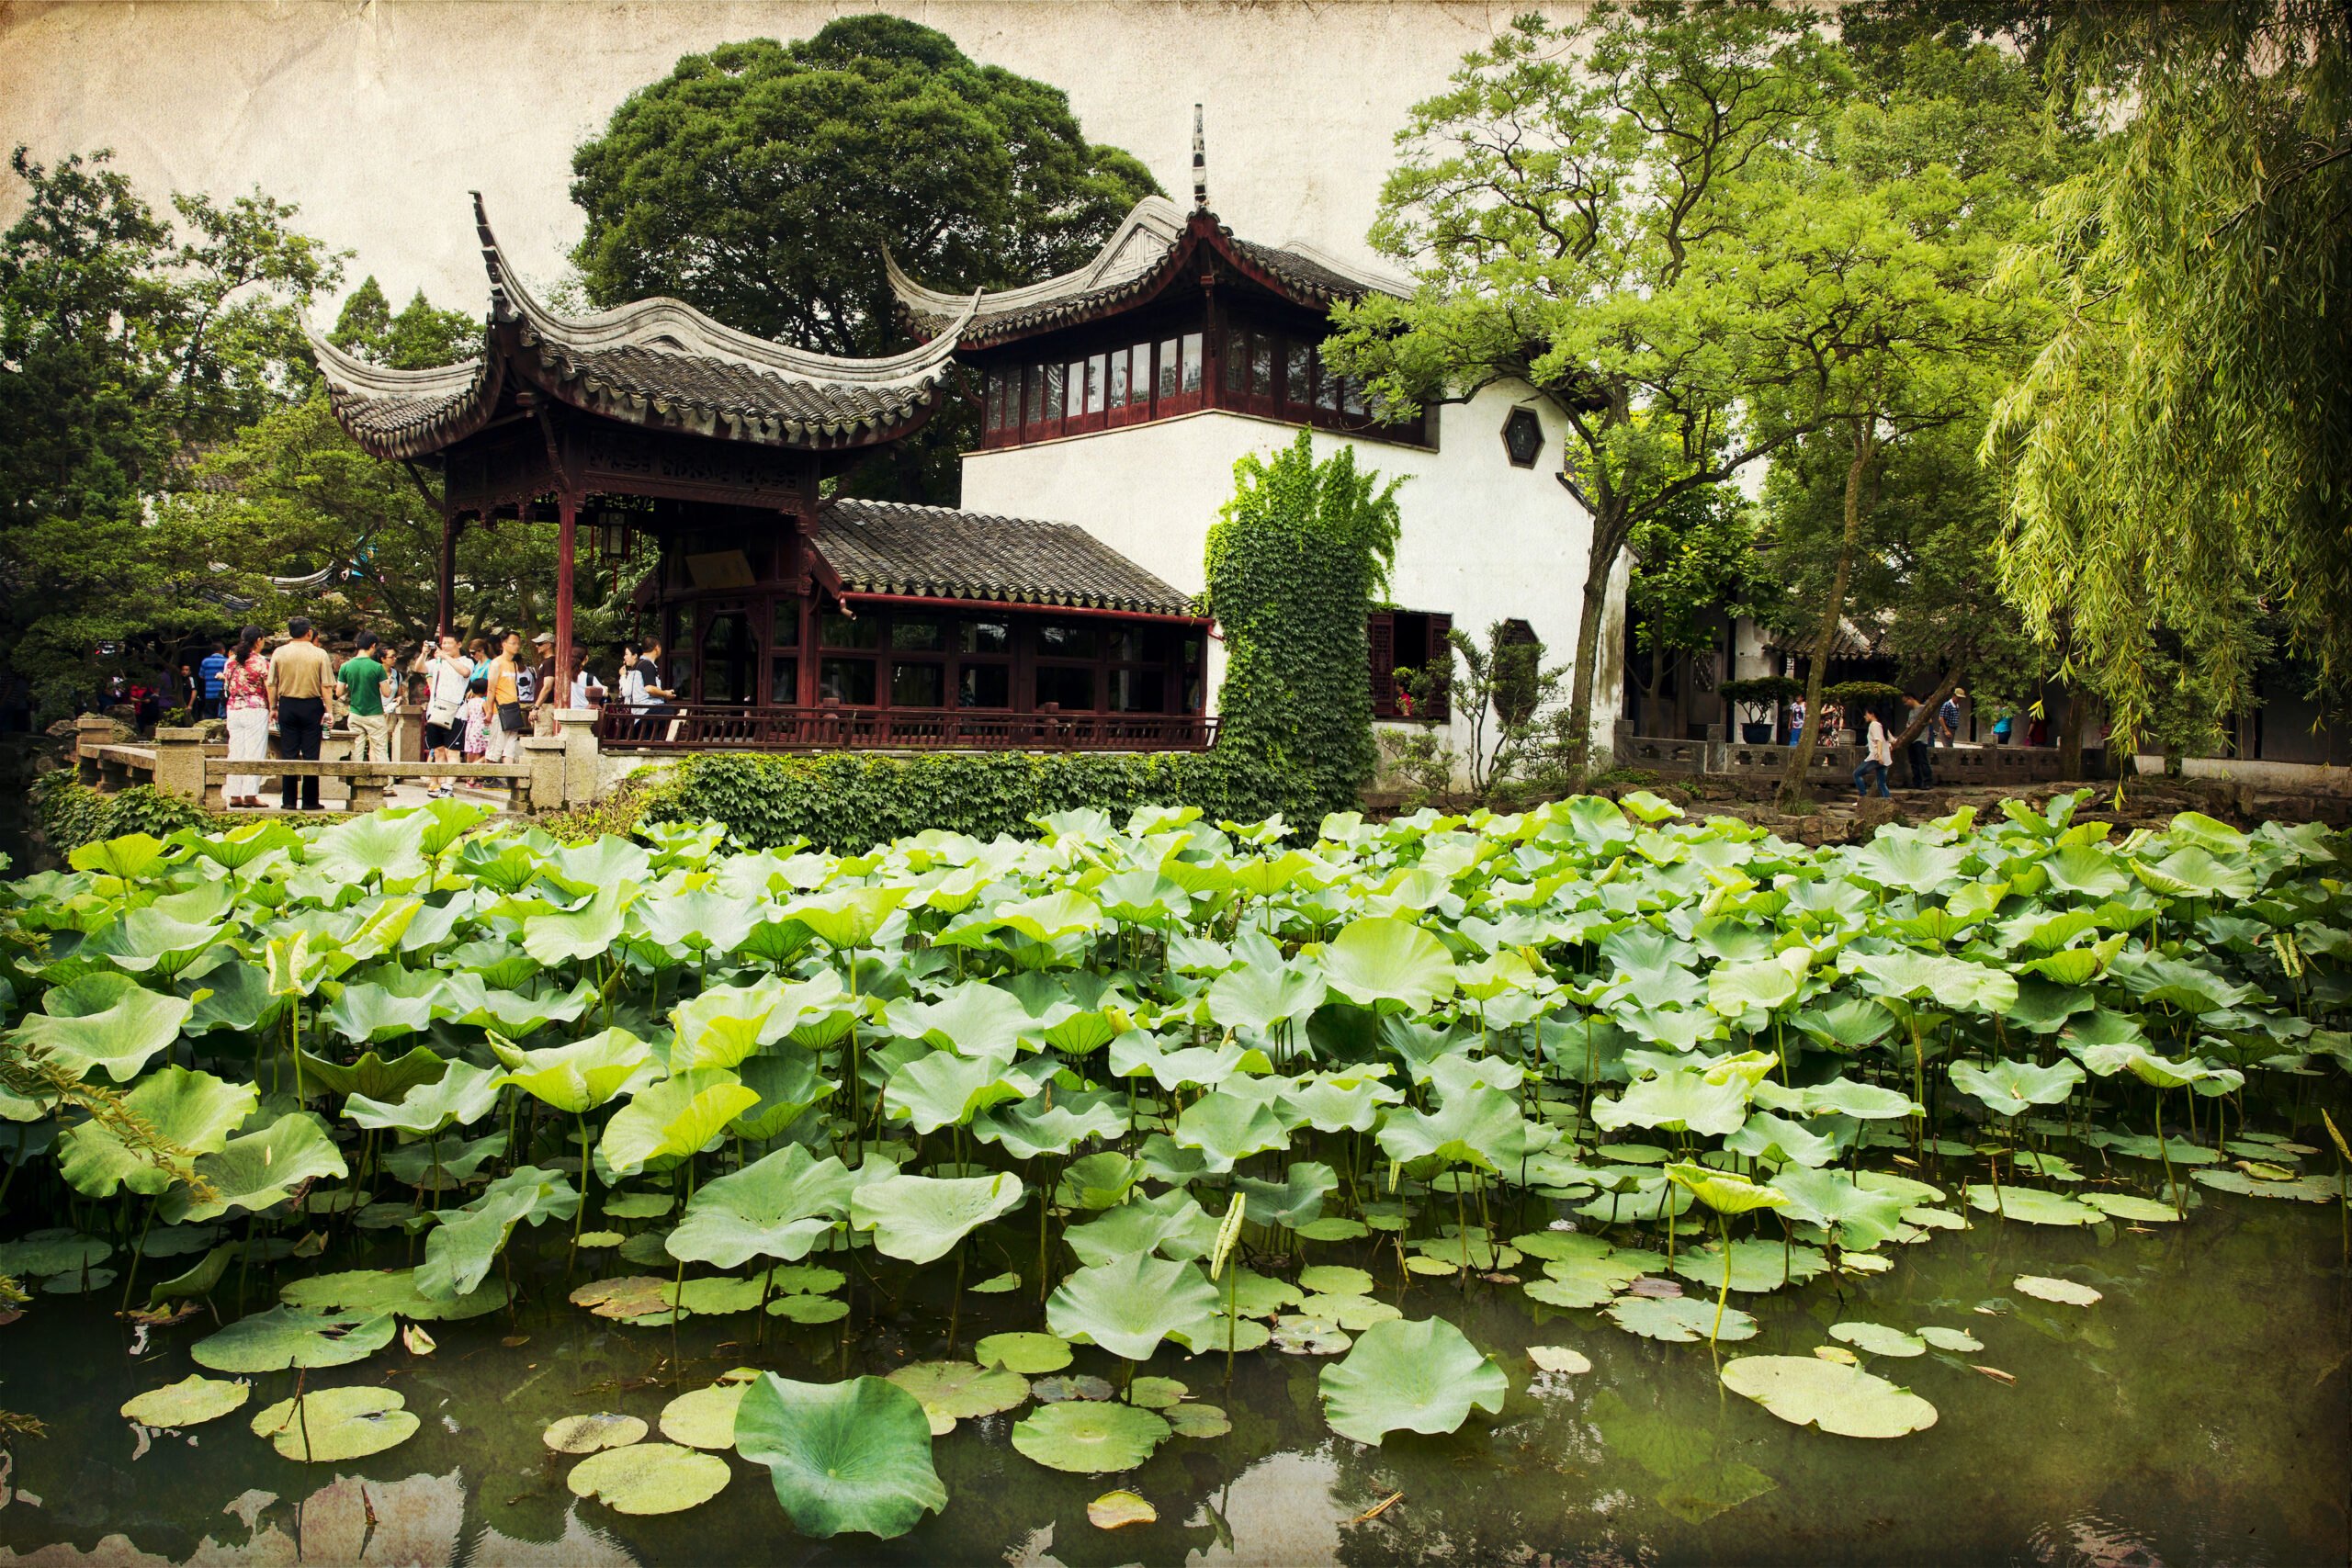 Learn About The History Of Suzhou That Was The Capital Of Wu Culture 800 Years Ago And Is One Of China's Leading Historic Cities In Our Suzhou Private Day Tour